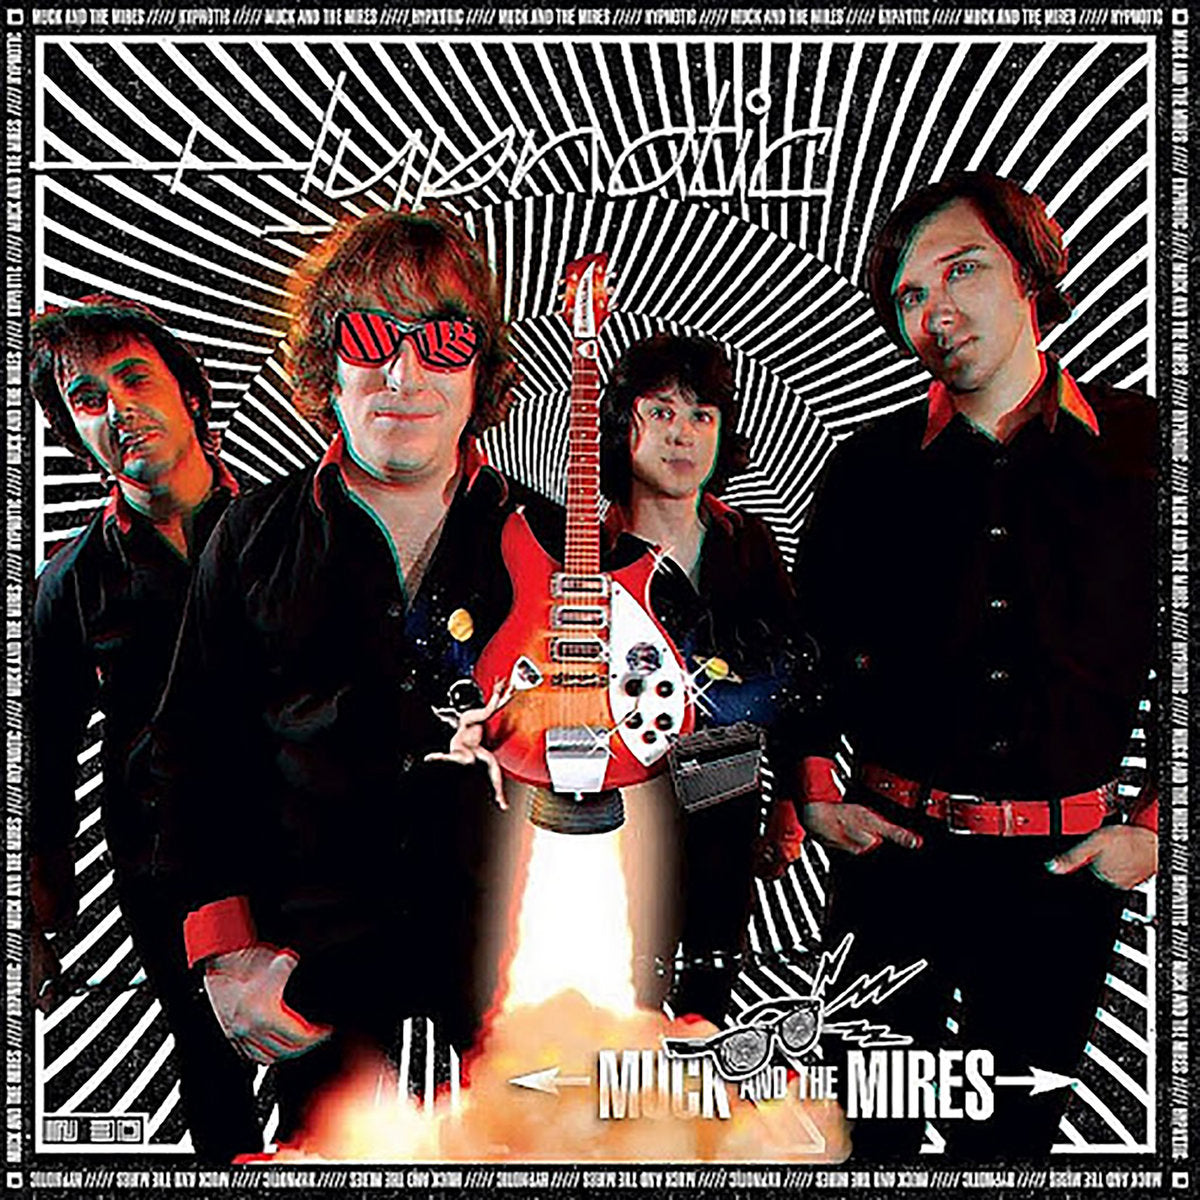 Muck And The Mires- Hypnotic LP ~W/ 3-D GLASSES INCLUDED!